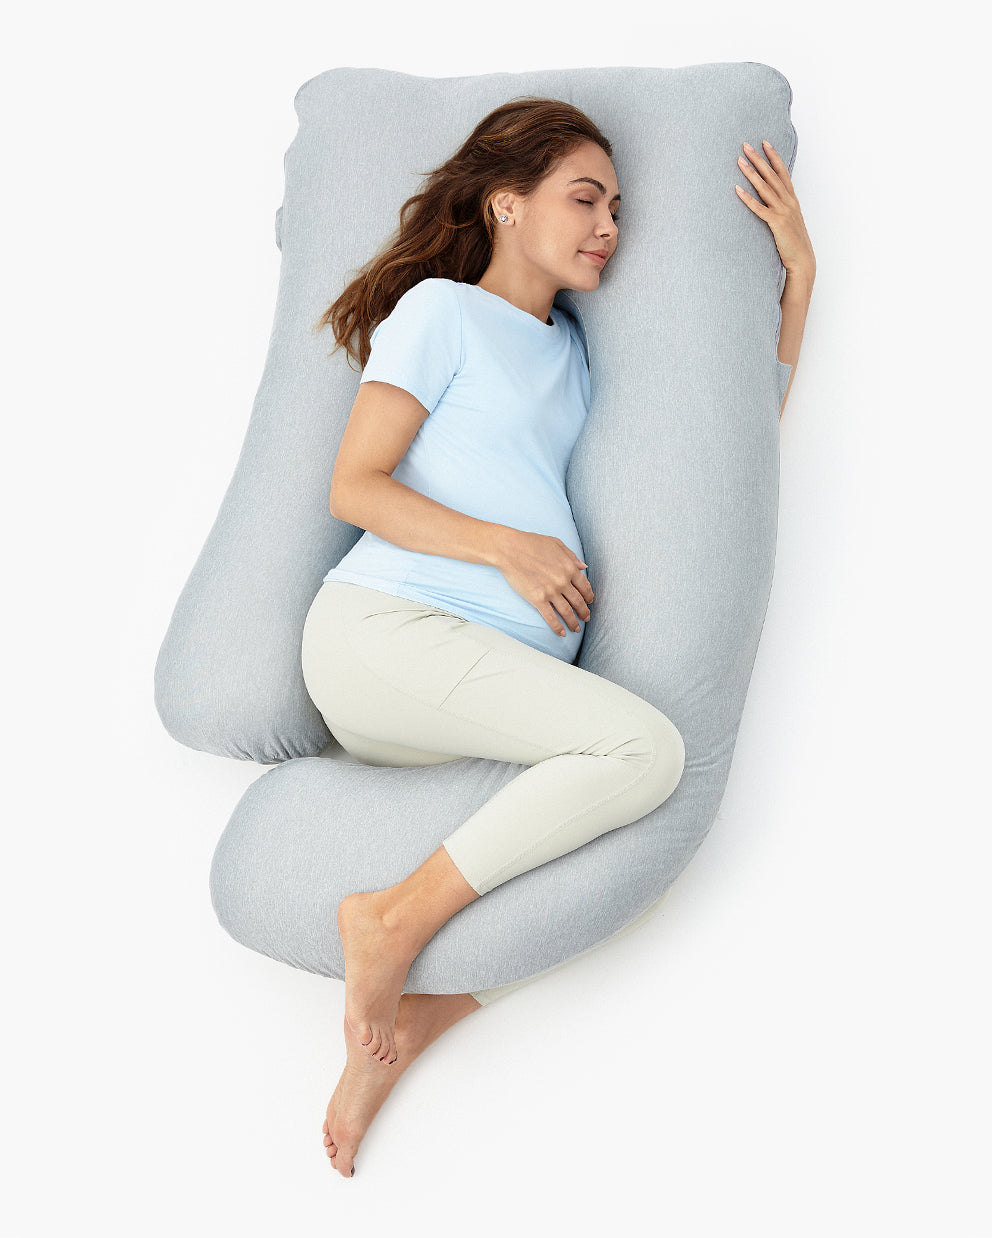 Huggable - Our Maternity Body Pillow for Moms-To-Be